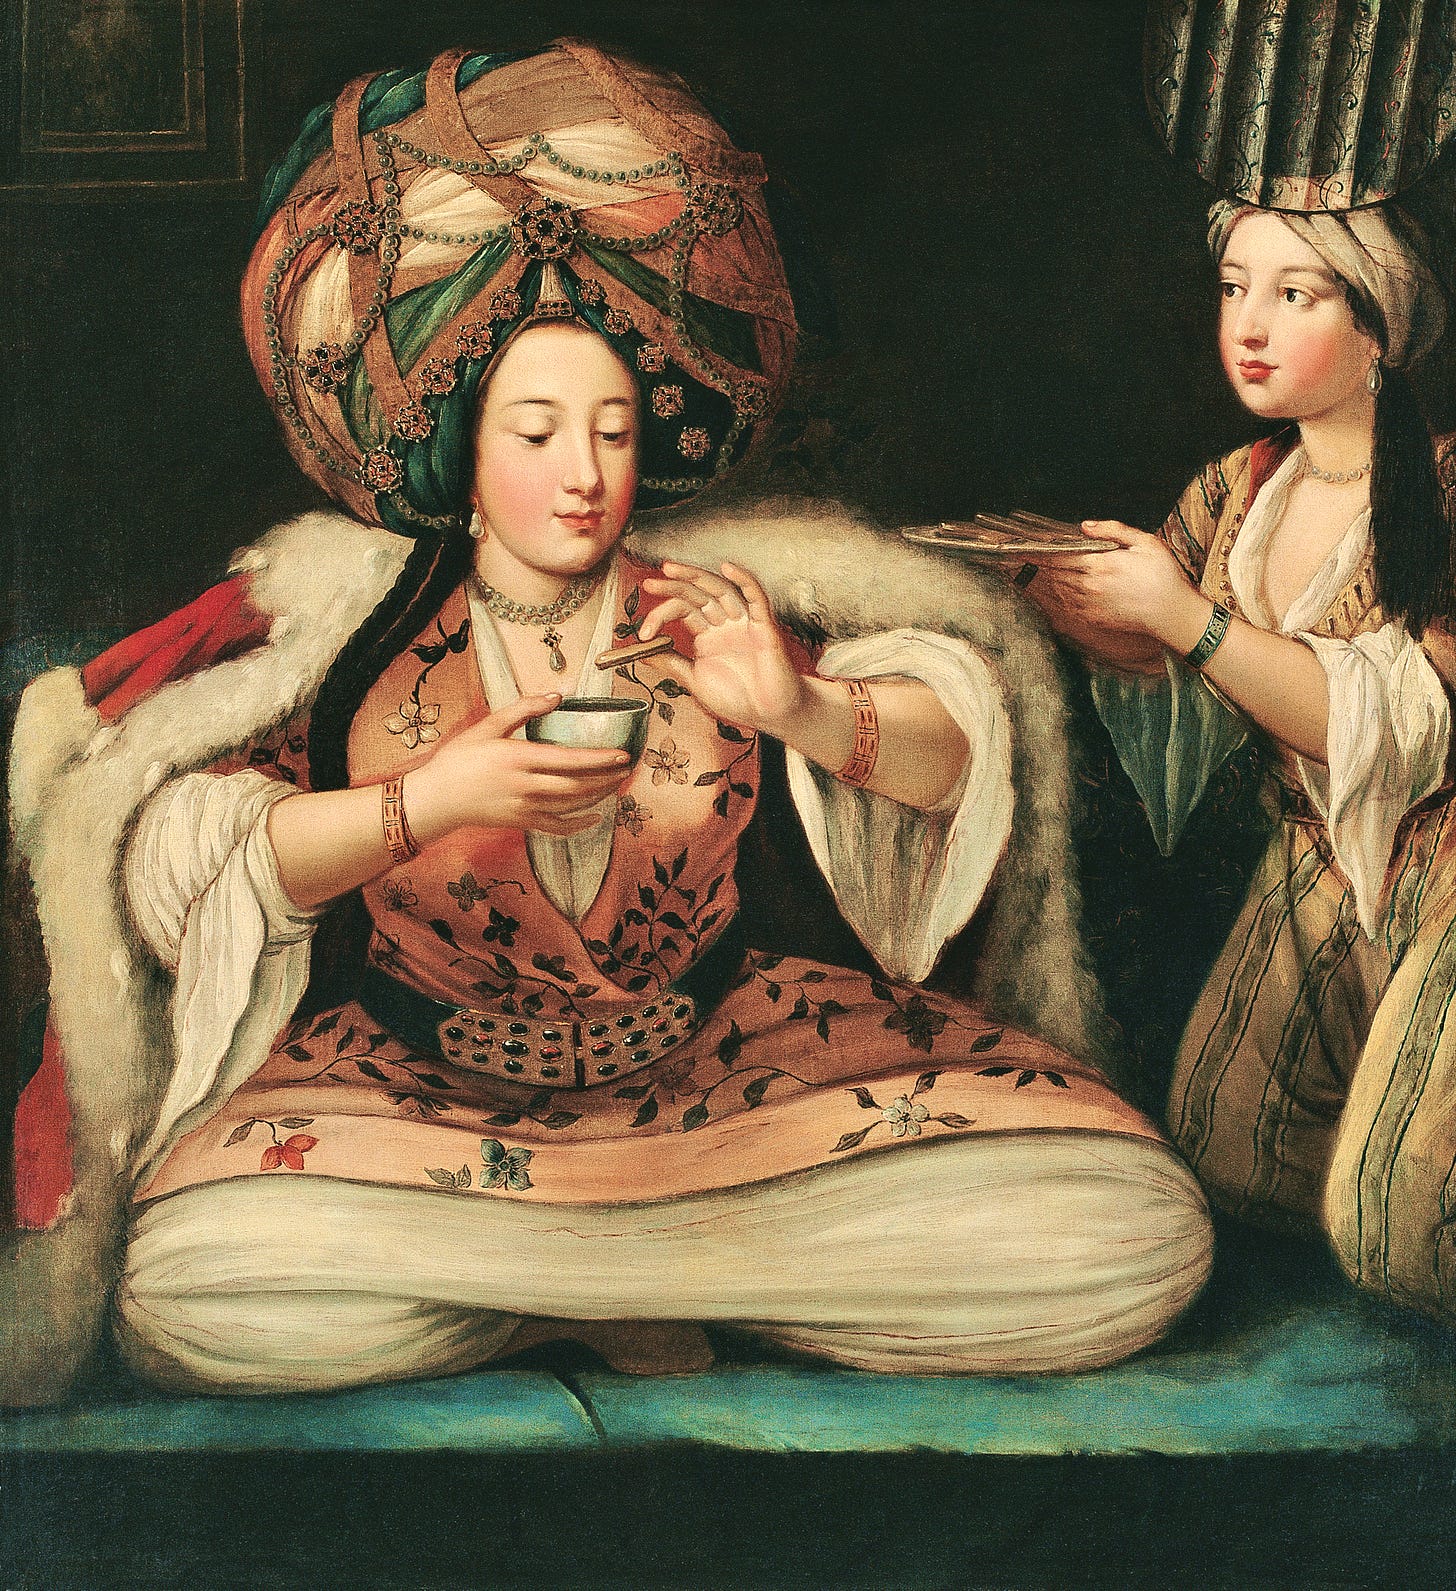 Two women in traditional Turkish costume